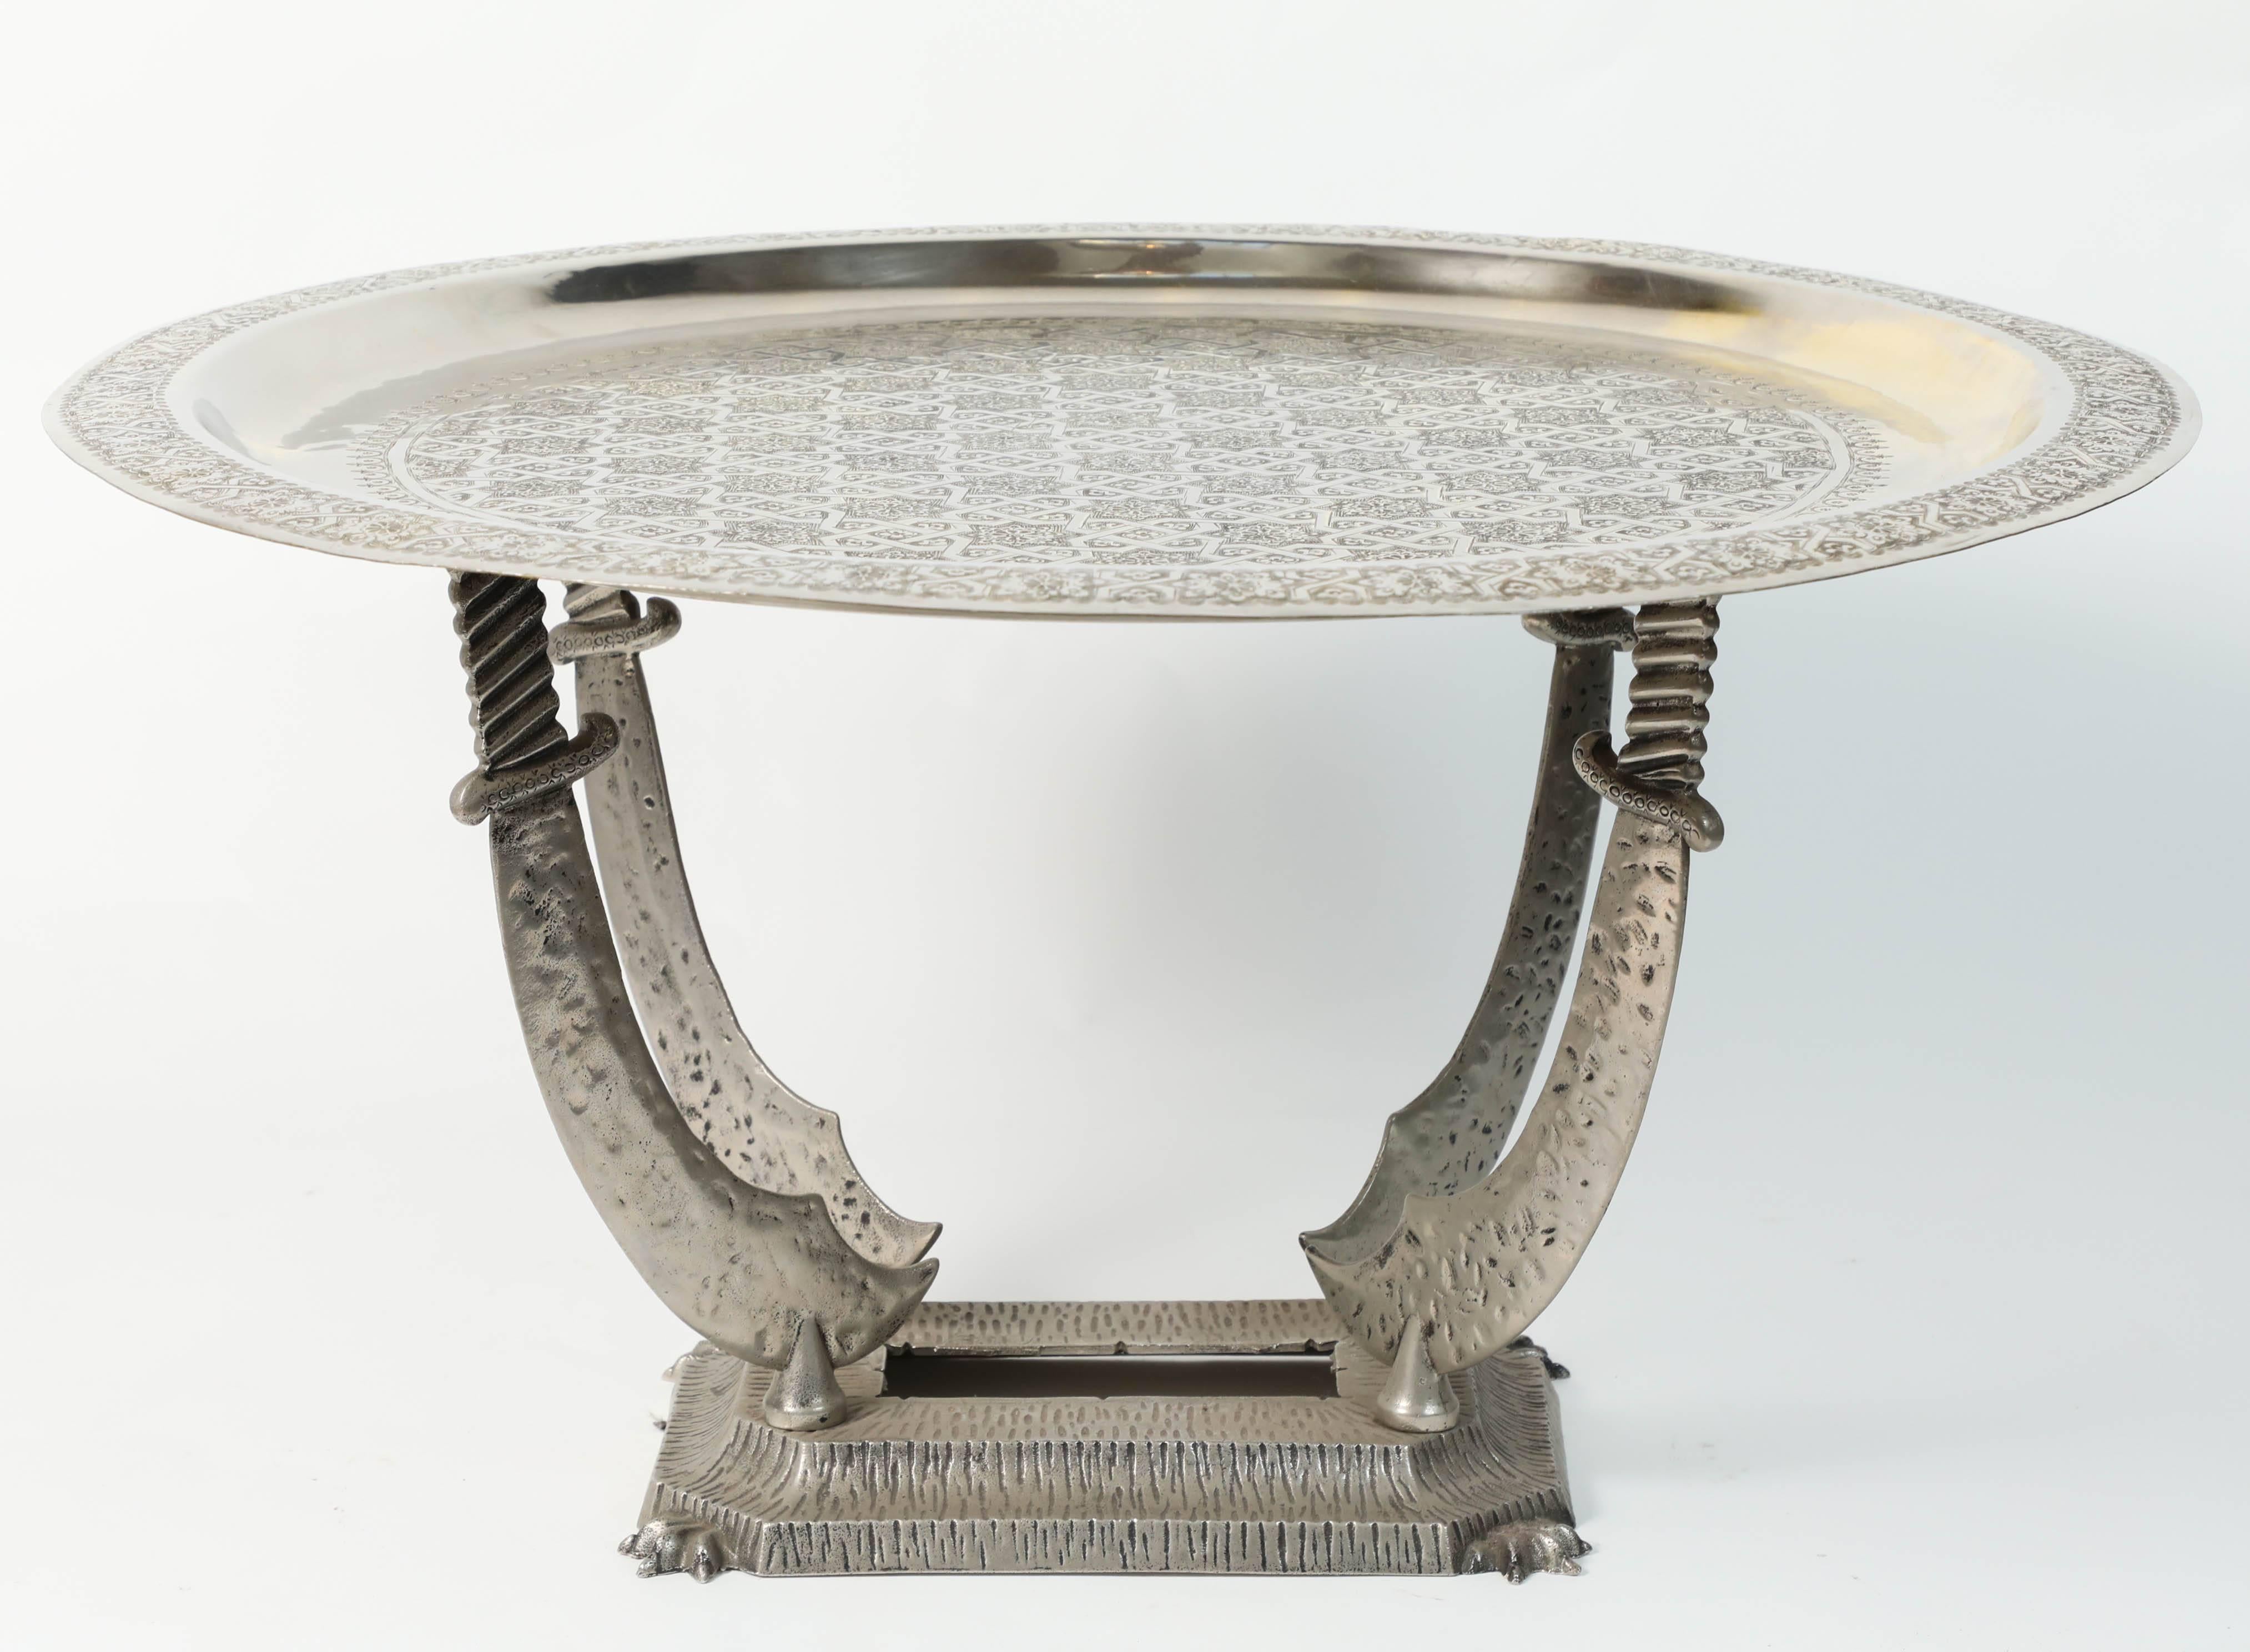 Moroccan silver color tray table with Middle Eastern stand made of four standing daggers.
The metal top tray is decorated with Arabic geometric Moorish designs.
The top is removable and consist of a round Moroccan tray on a metal Stand.
Great to